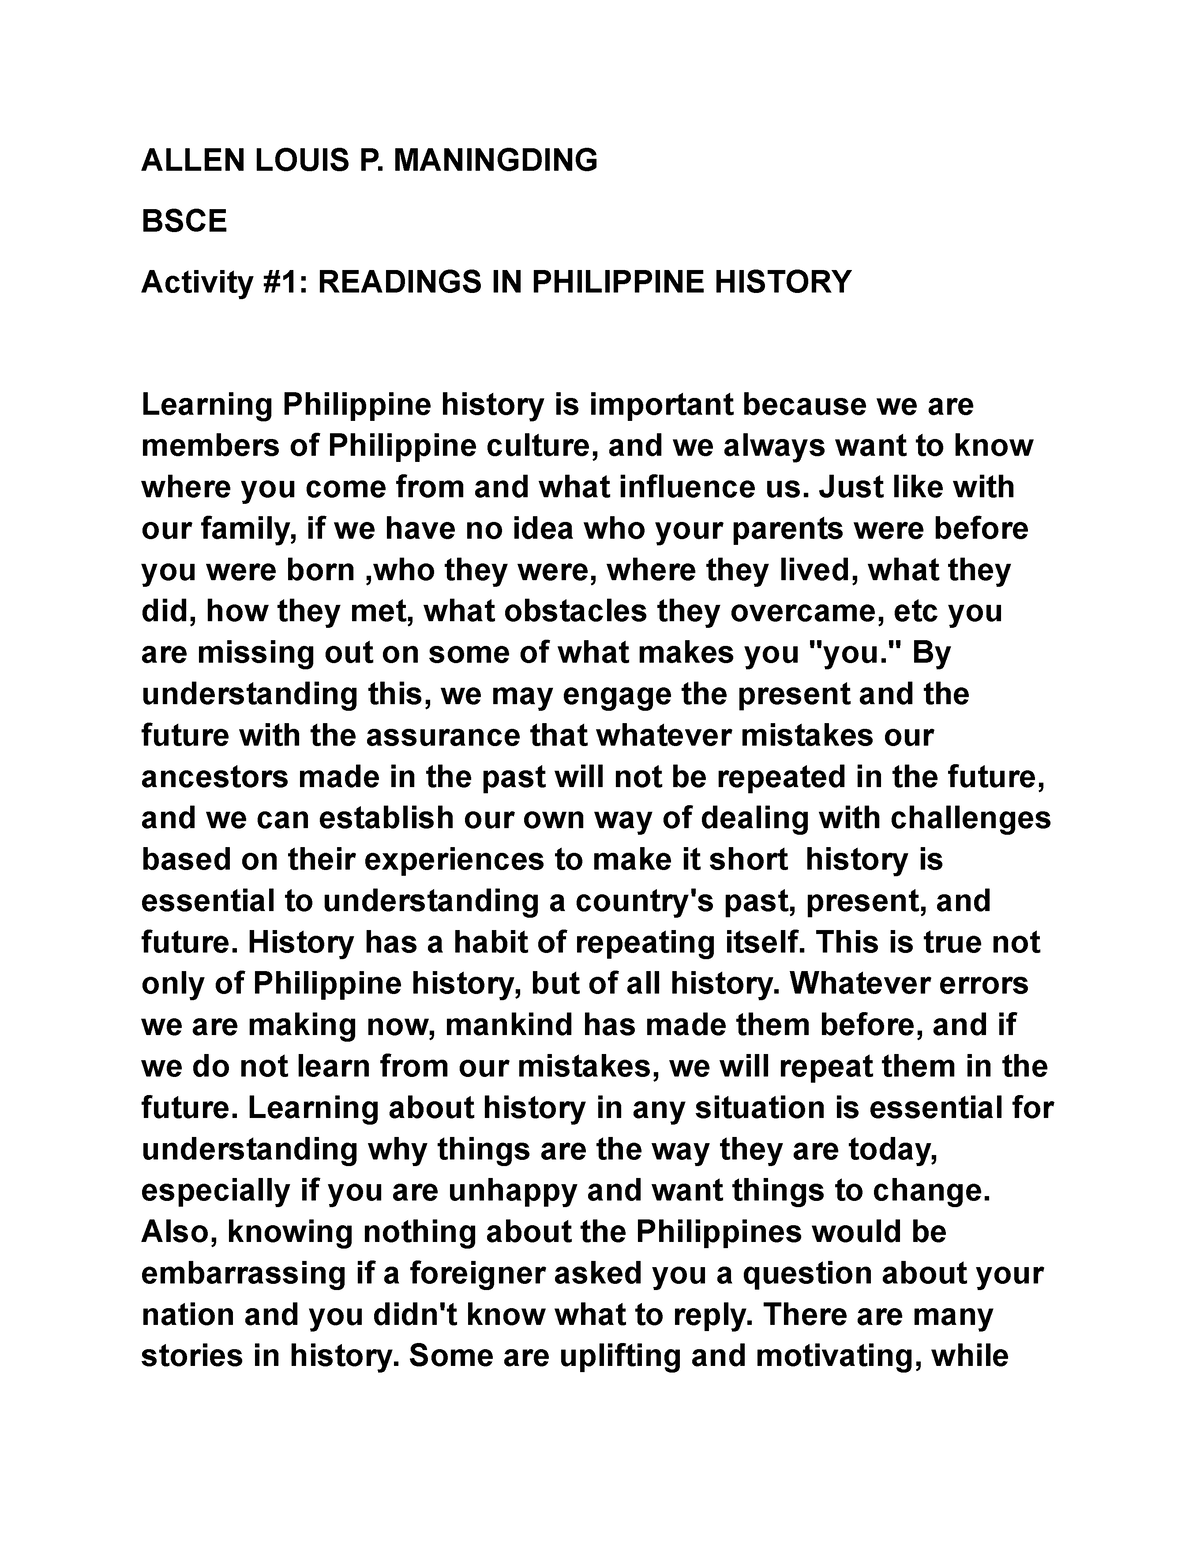 readings in philippine history essay questions